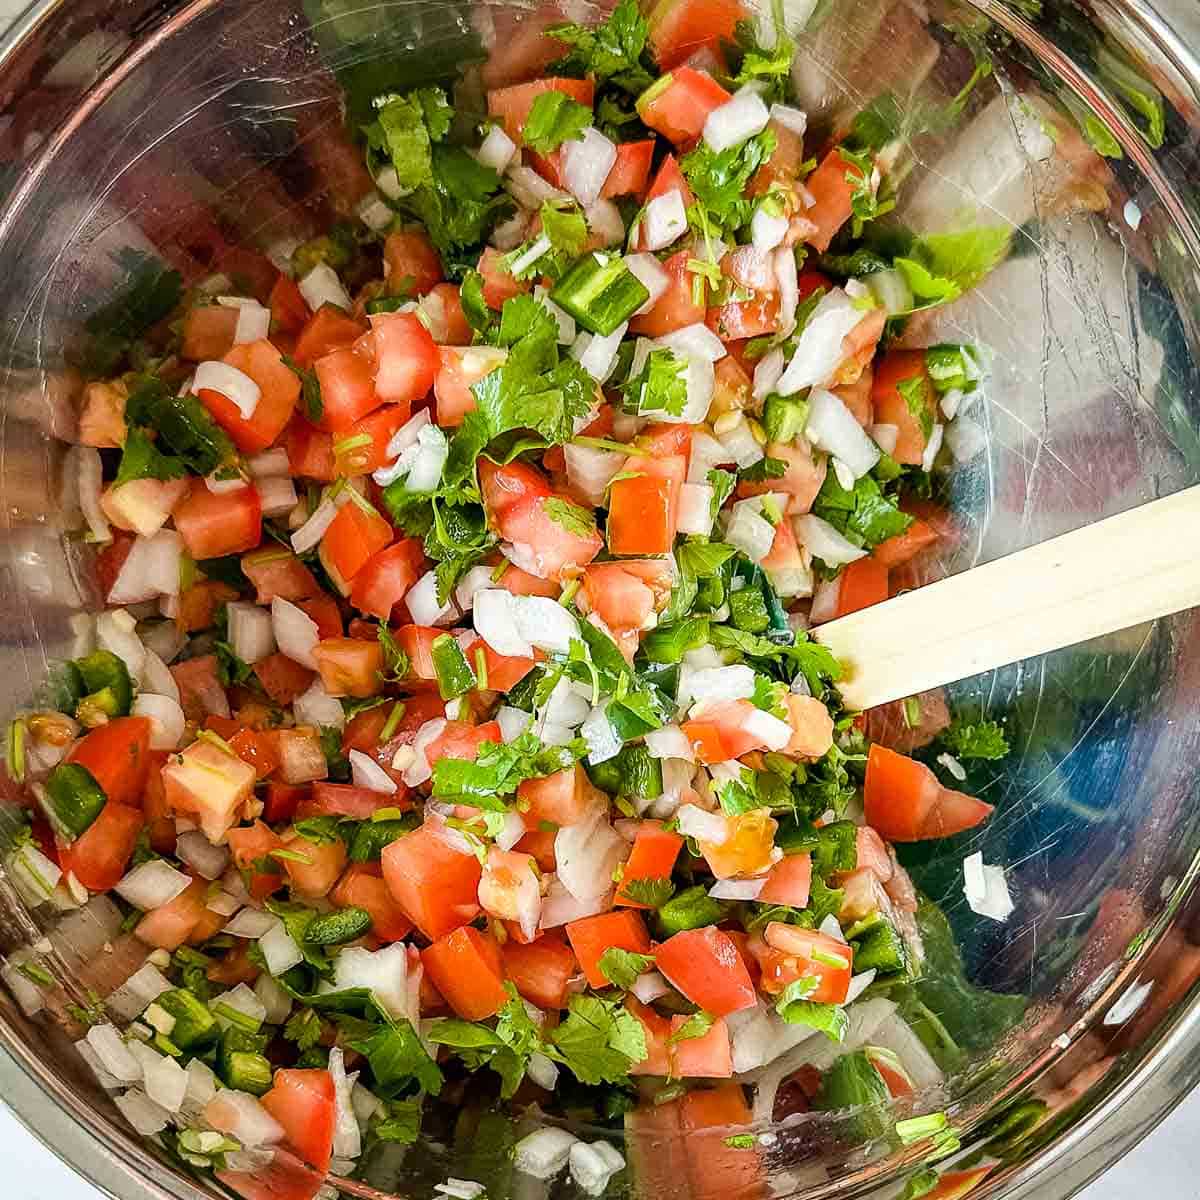 Garden fresh salsa is mixed in a stainless steel bowl.